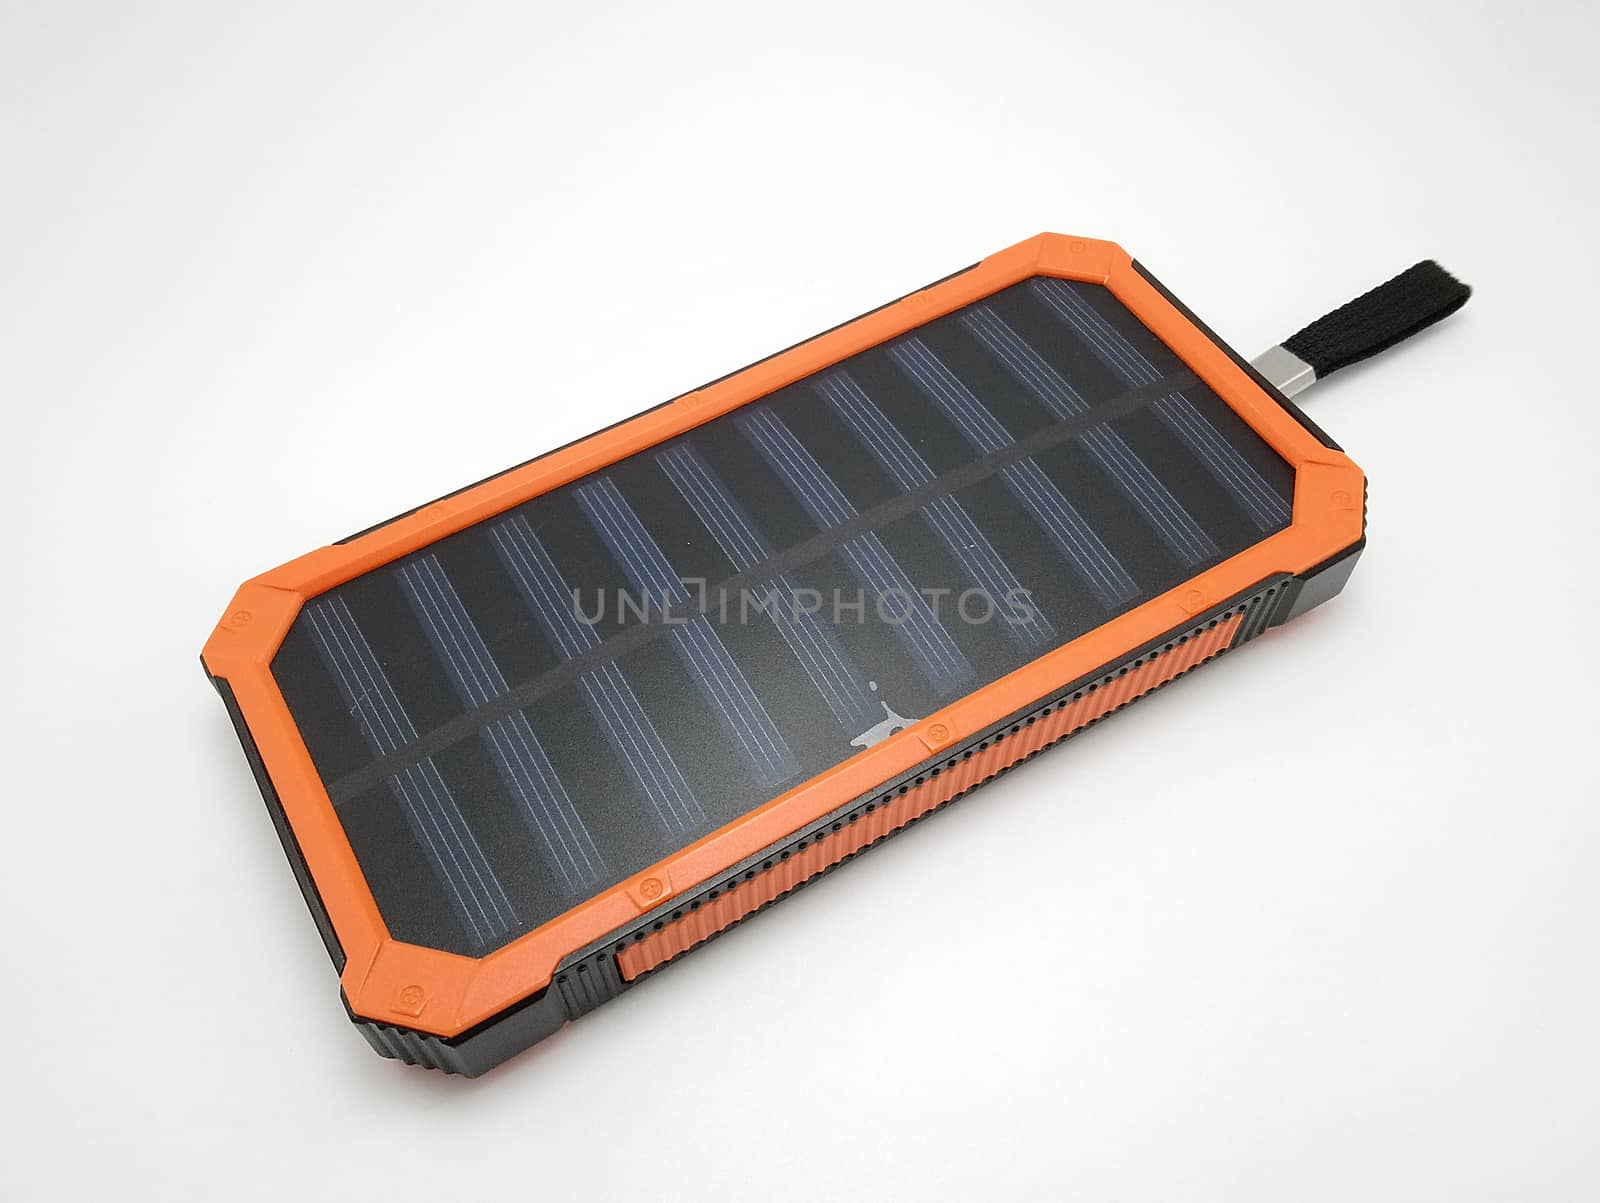 Solar power powerbank charger handy gadget accessory by imwaltersy